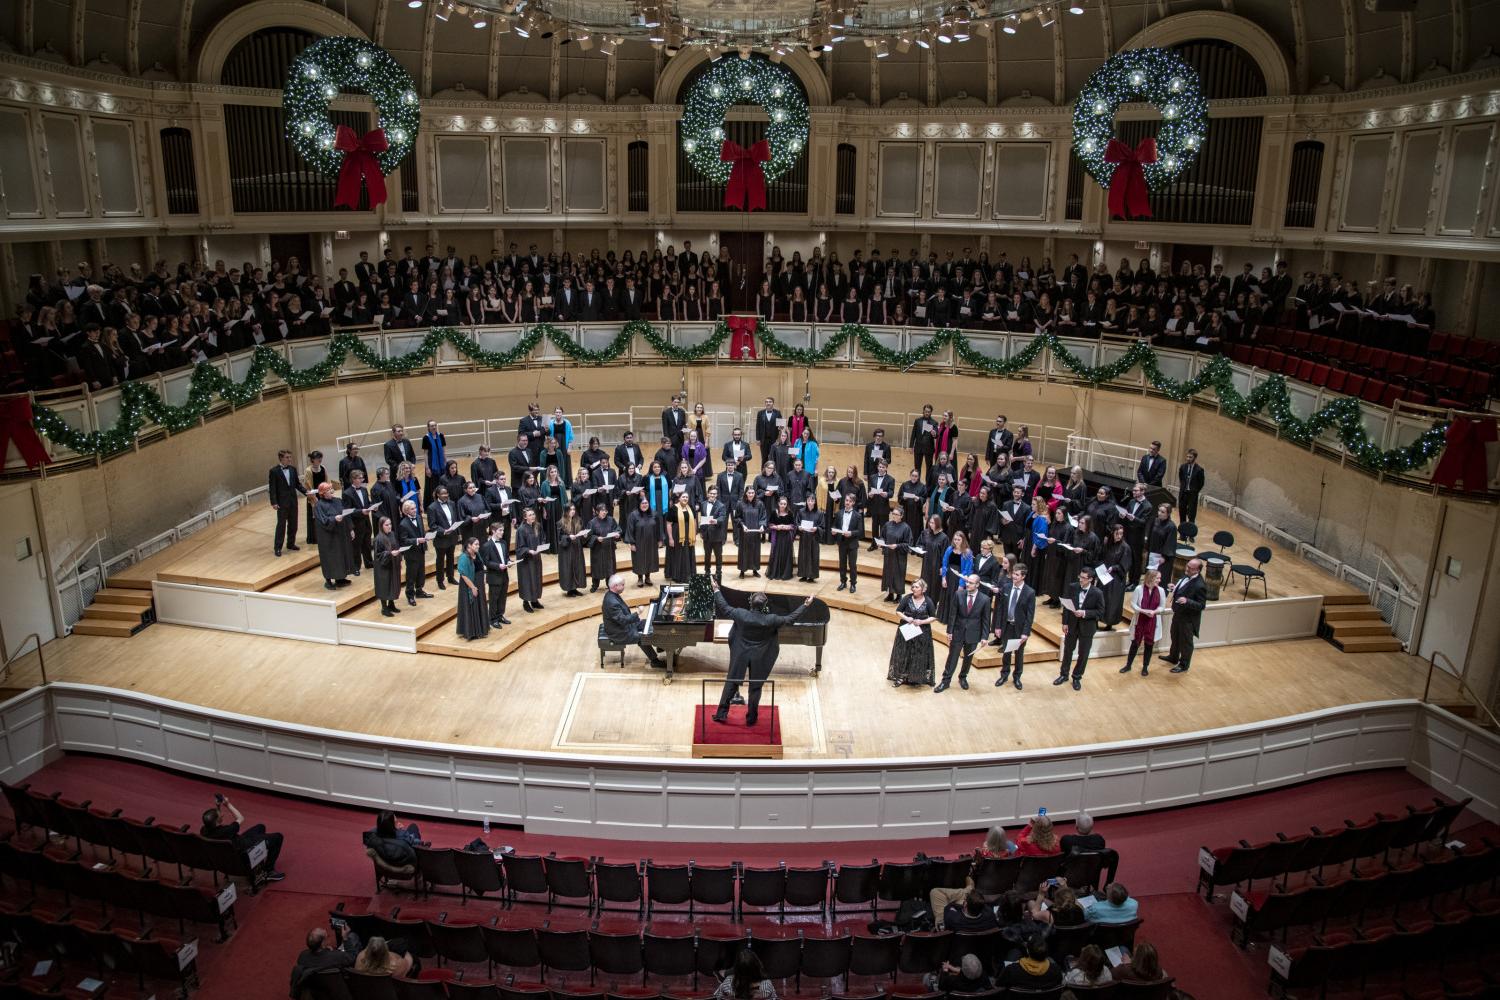 The <a href='http://yf.takechargesummit.com'>bv伟德ios下载</a> Choir performs in the Chicago Symphony Hall.